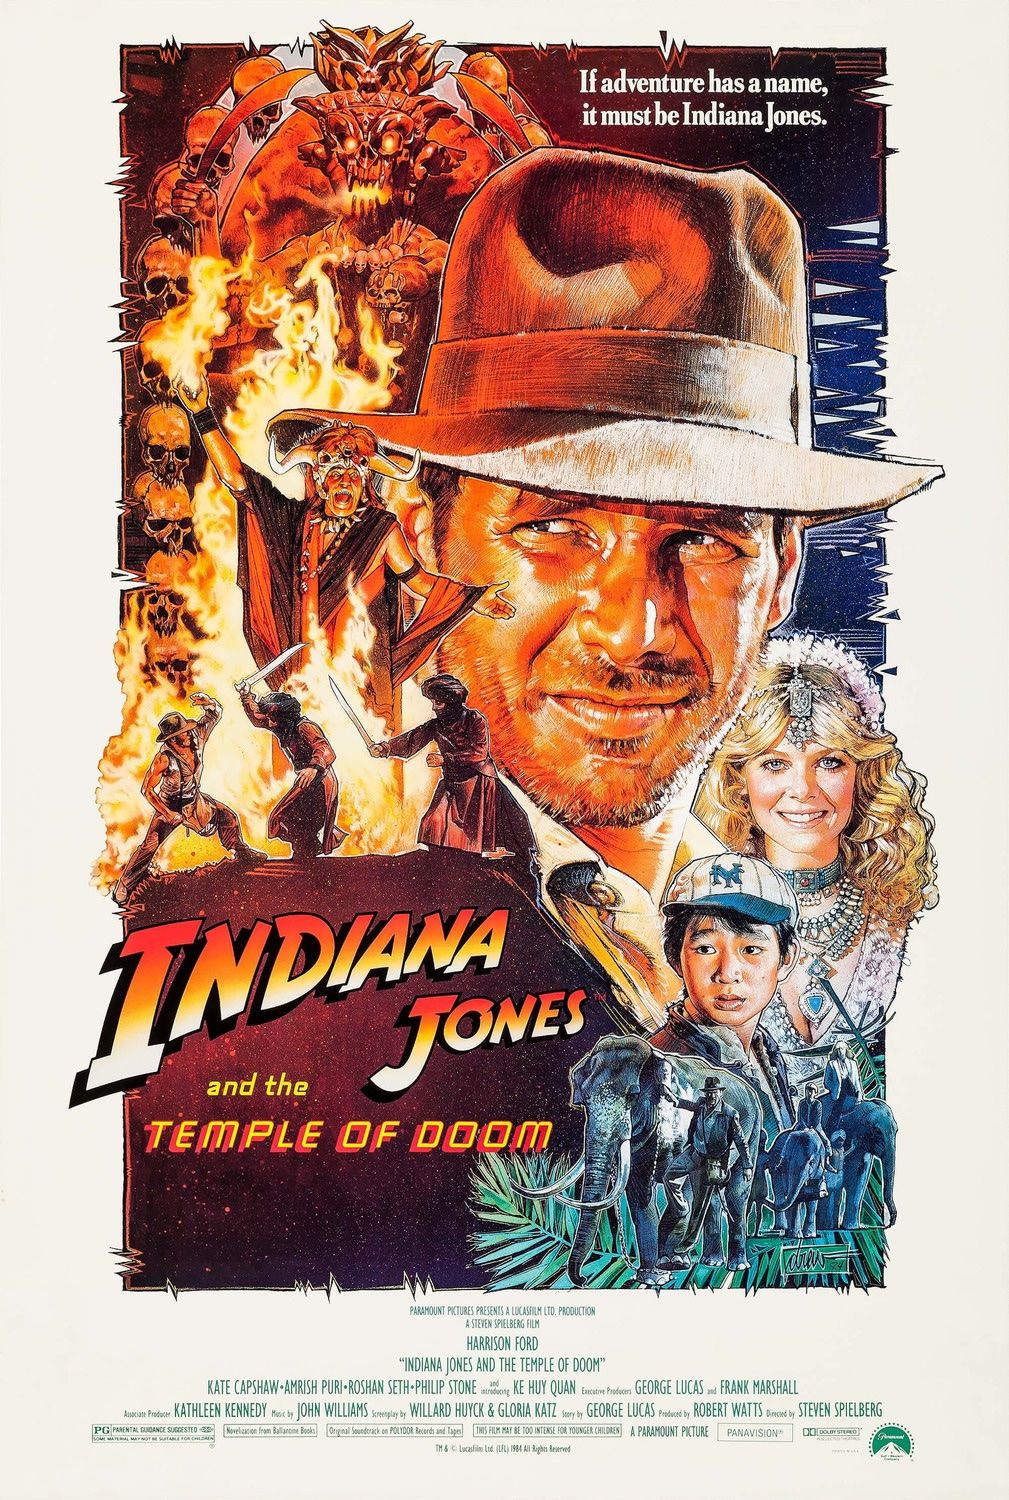 Harrison Ford, Kate Capshaw and Ke Huy Quan in Indiana Jones and the Temple of Doom 1984 Film Poster